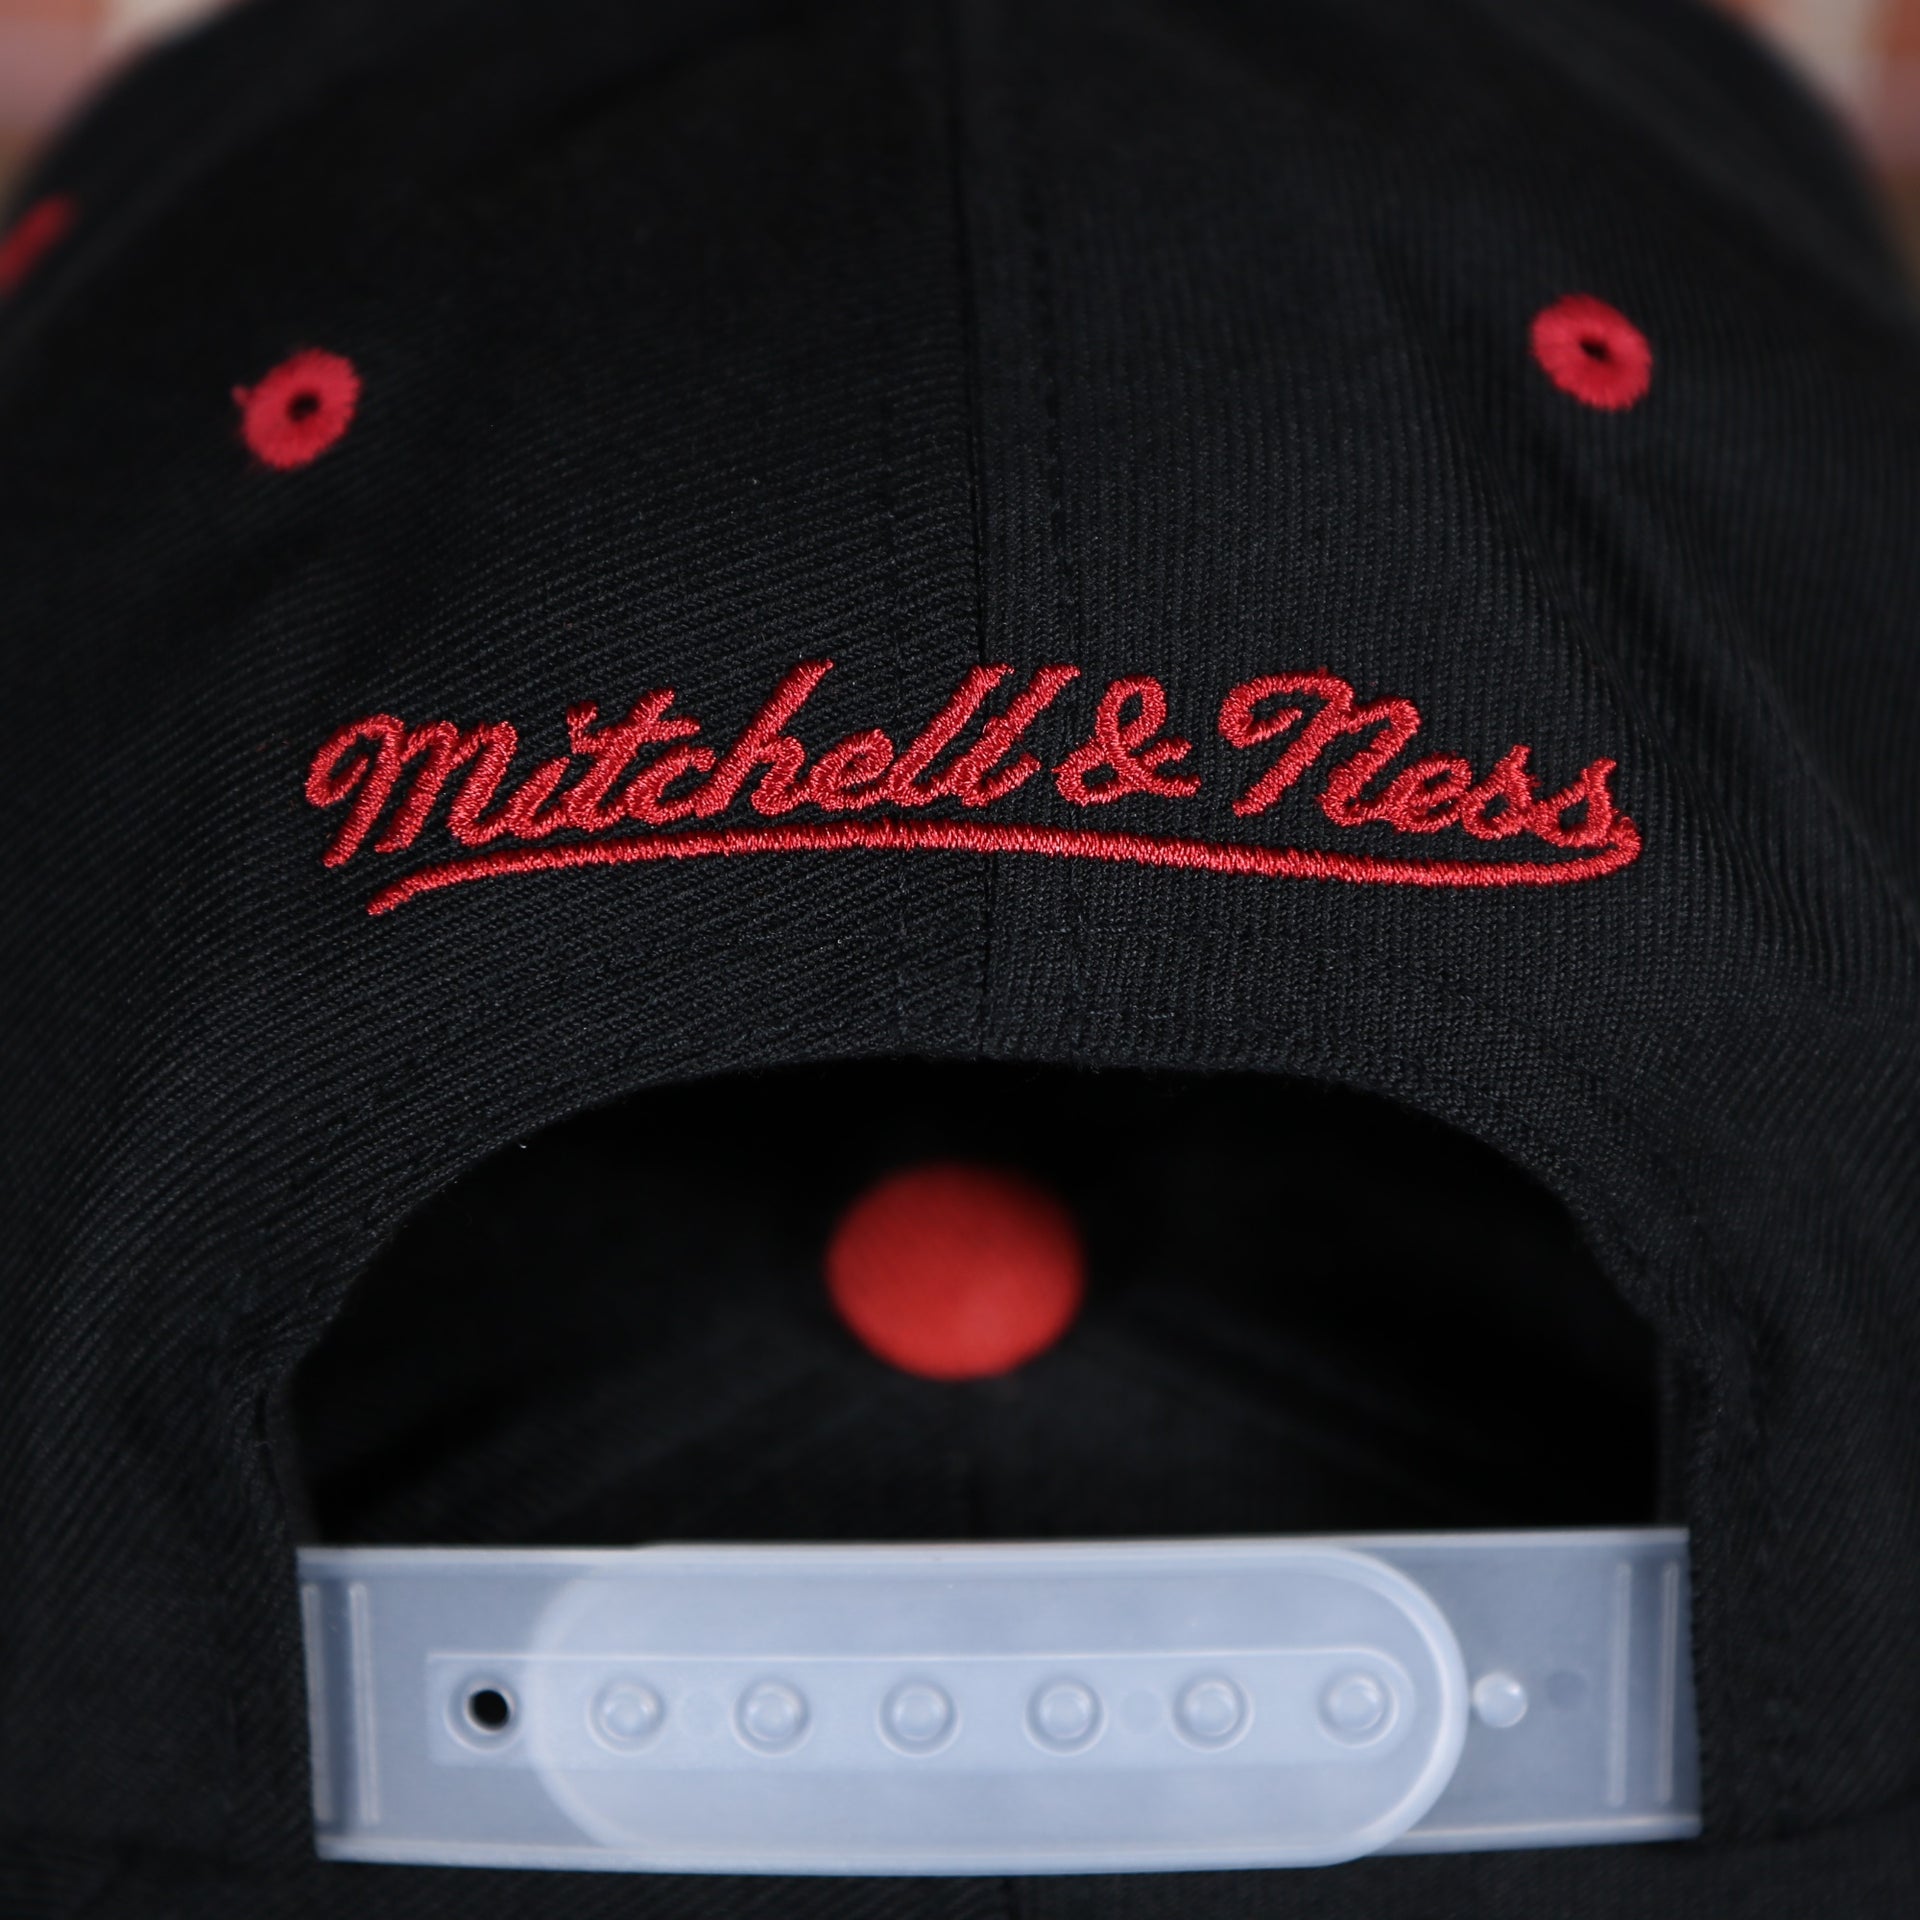 mtichell and ness logo on the Heat reflective 3m snapback | Mitchell Ness Heat Snapback | Miami snapback heat